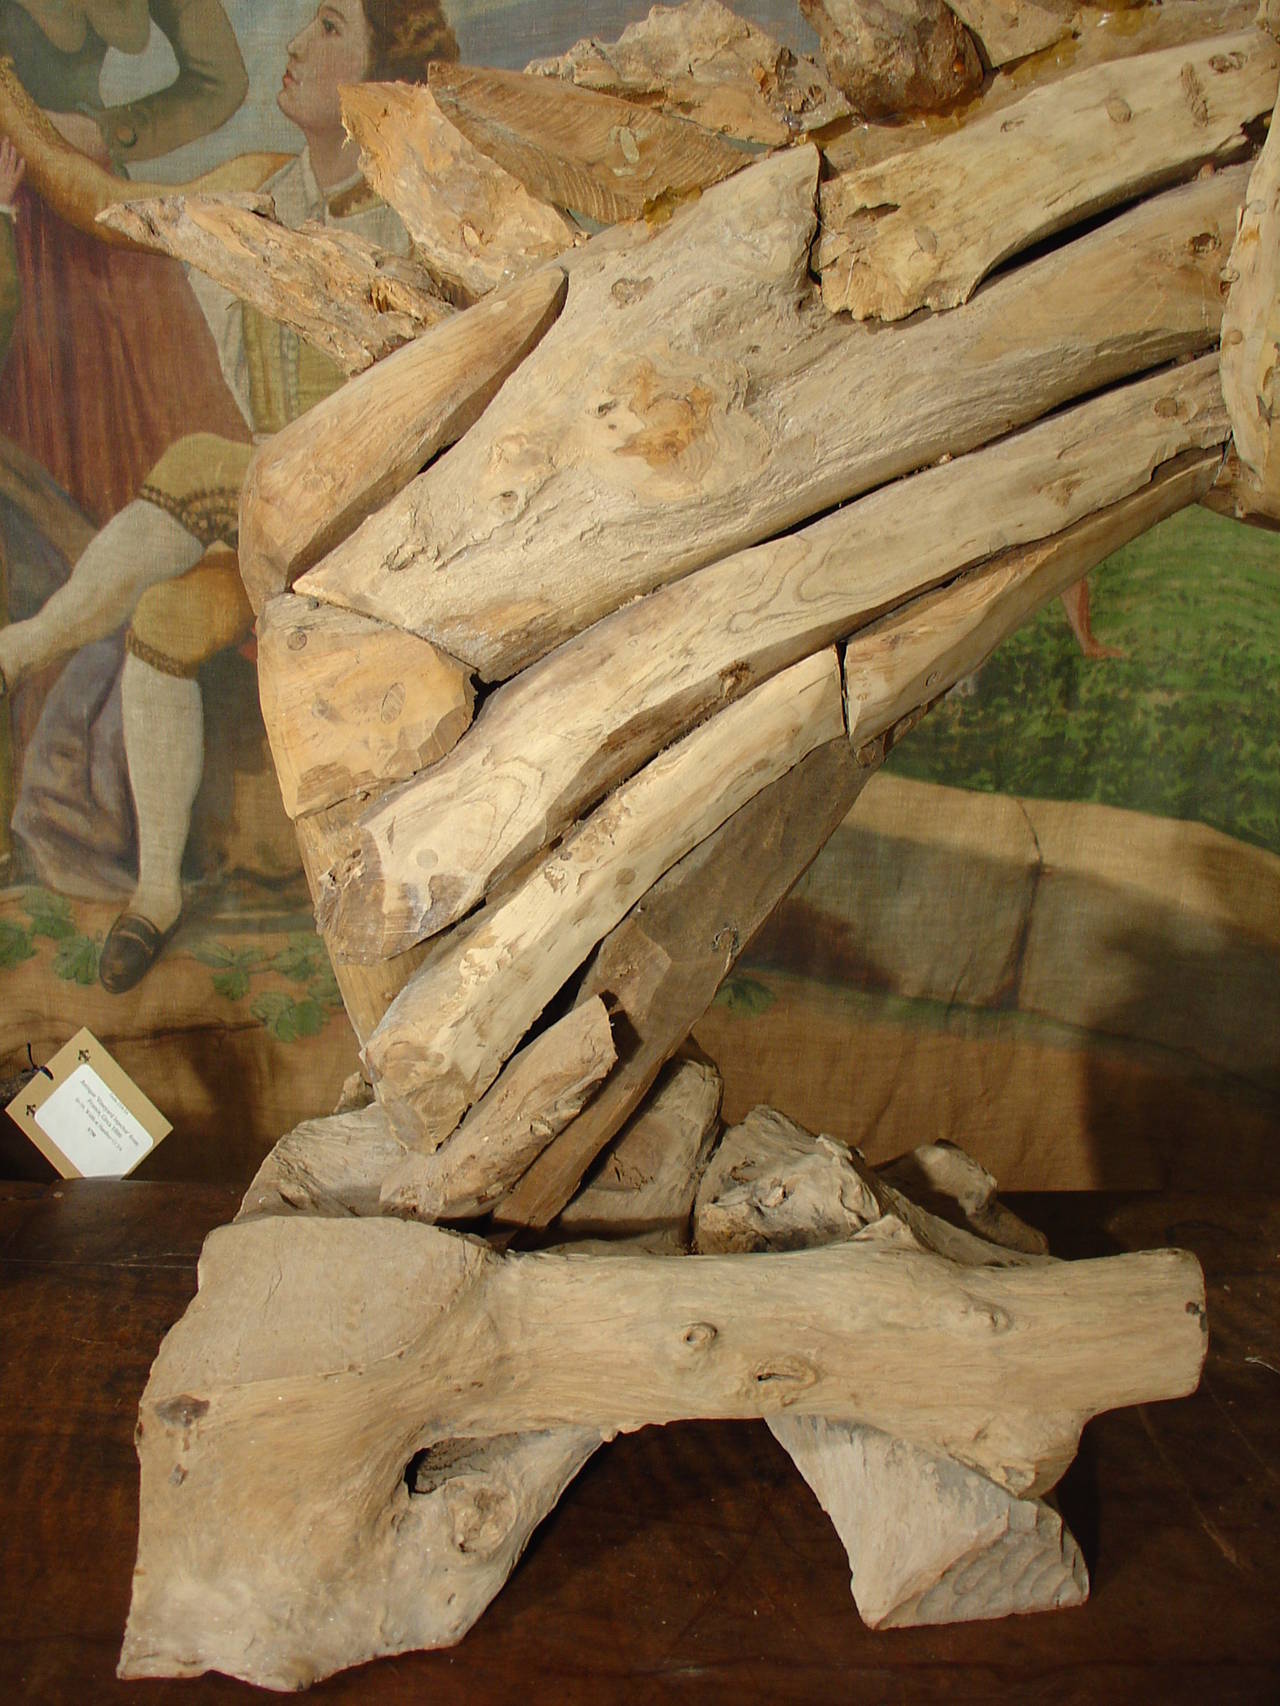 From France, comes this absolutely stunning driftwood sculpture a horse in a state of high emotion.  The horse has his mouth open wide, with his upper lip slightly curled, mane flying in the air, and flared nostrils.   The sculptor has artfully